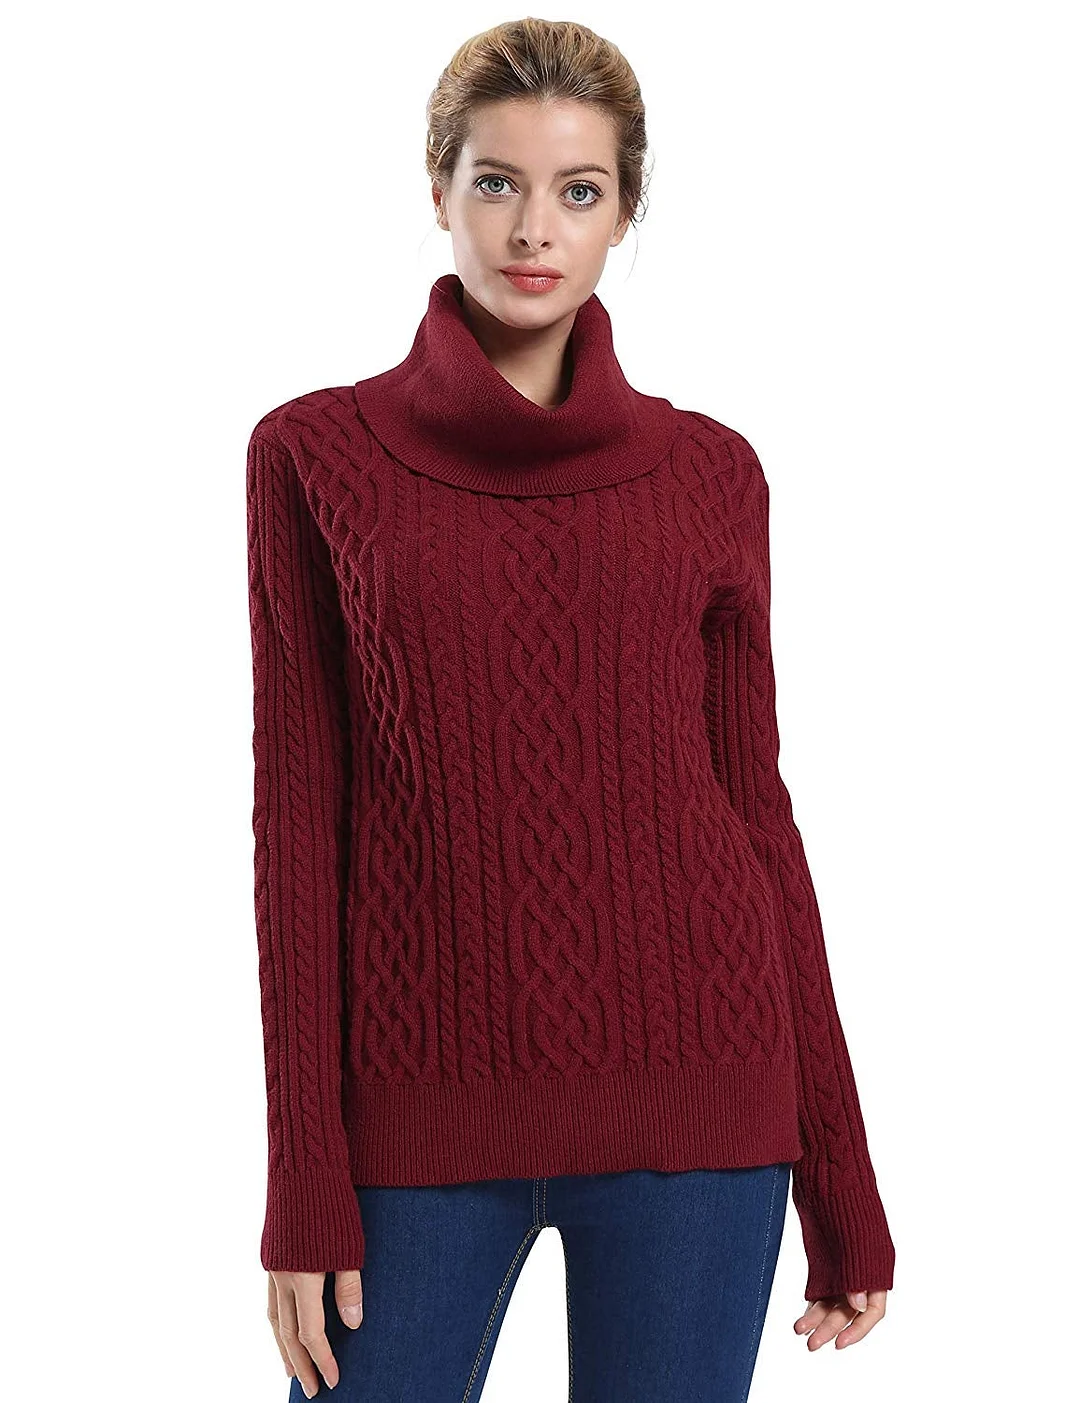 Women's Cowl-Neck Sweater Long Sleeve Pullover Cable Knit Sweater Tops